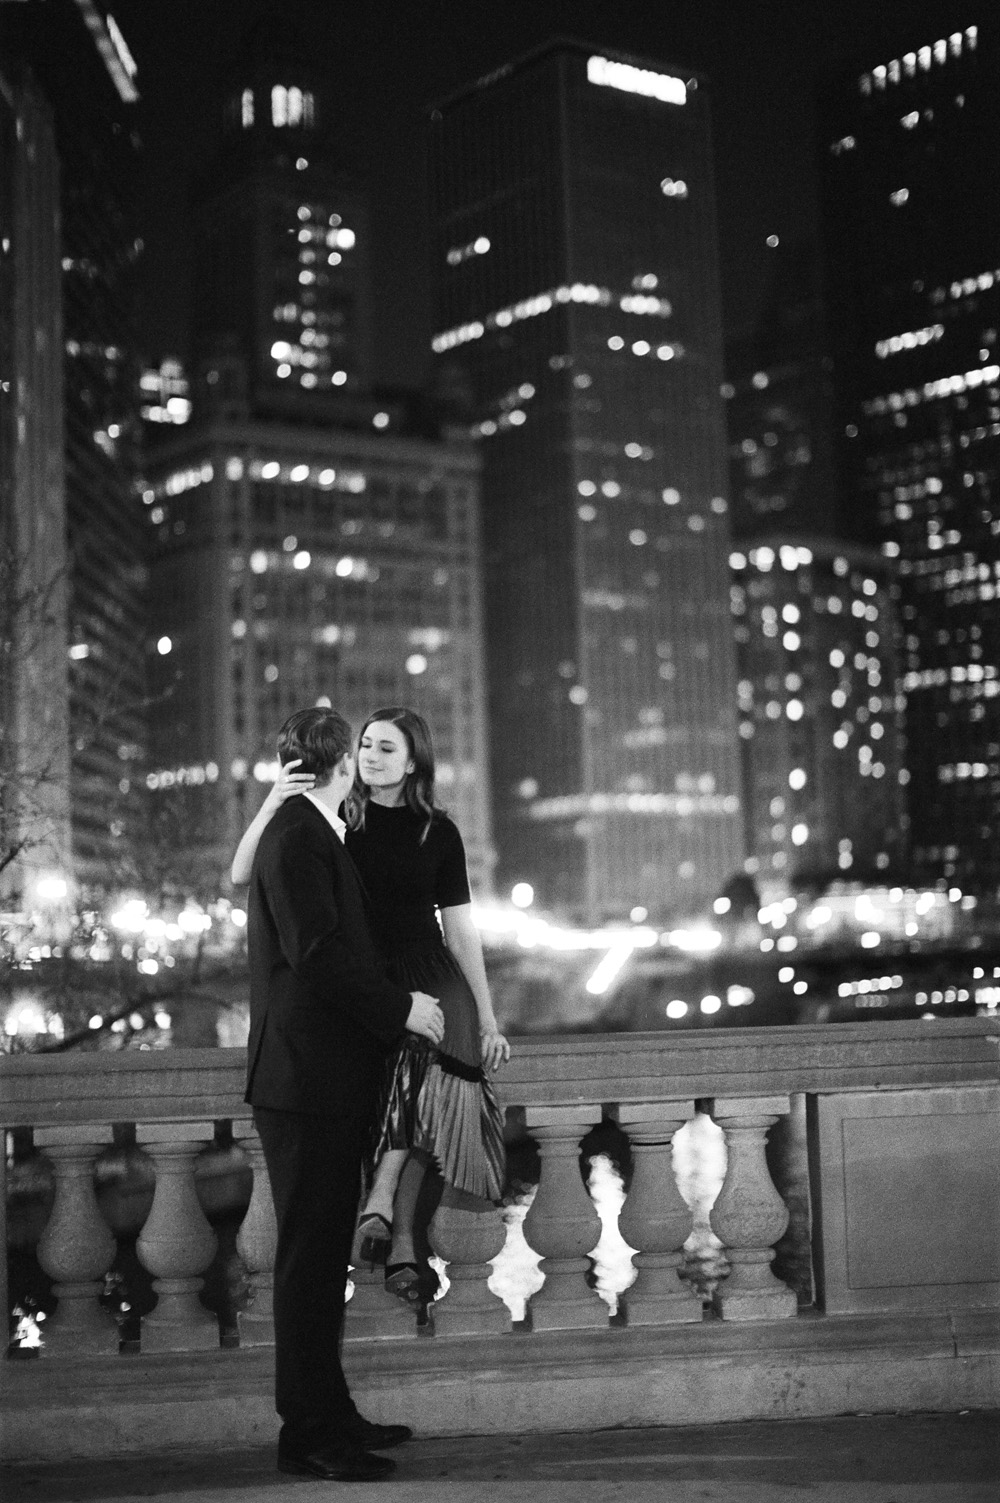 Chicago in bw at night city lights with romantic moment for engaged couple Mary Dougherty